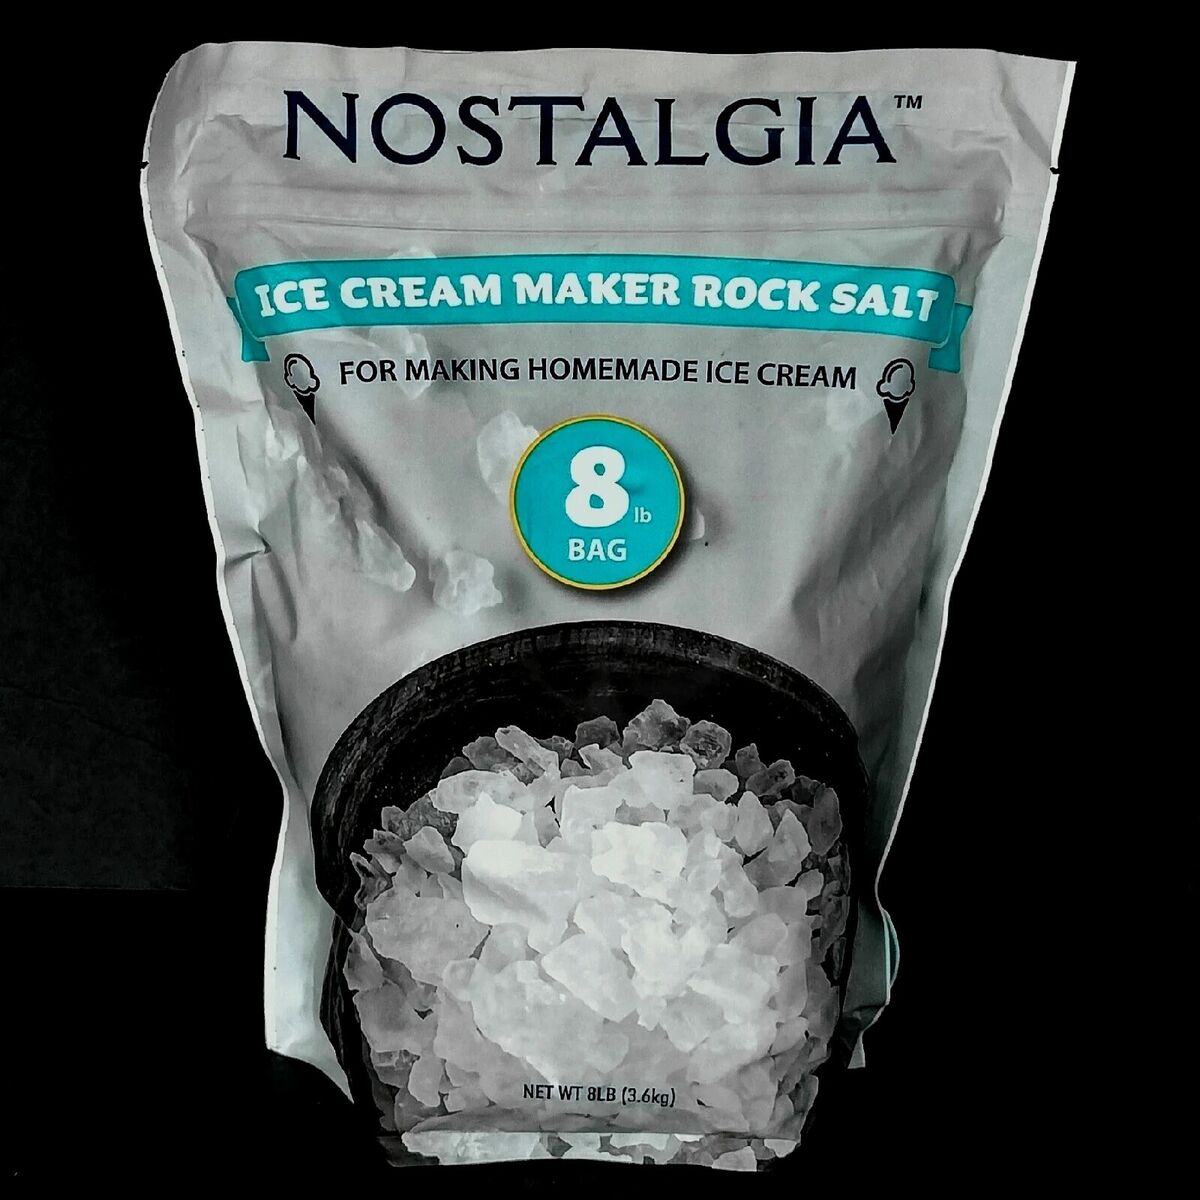 what-do-i-need-to-use-ice-cream-maker-rock-salt